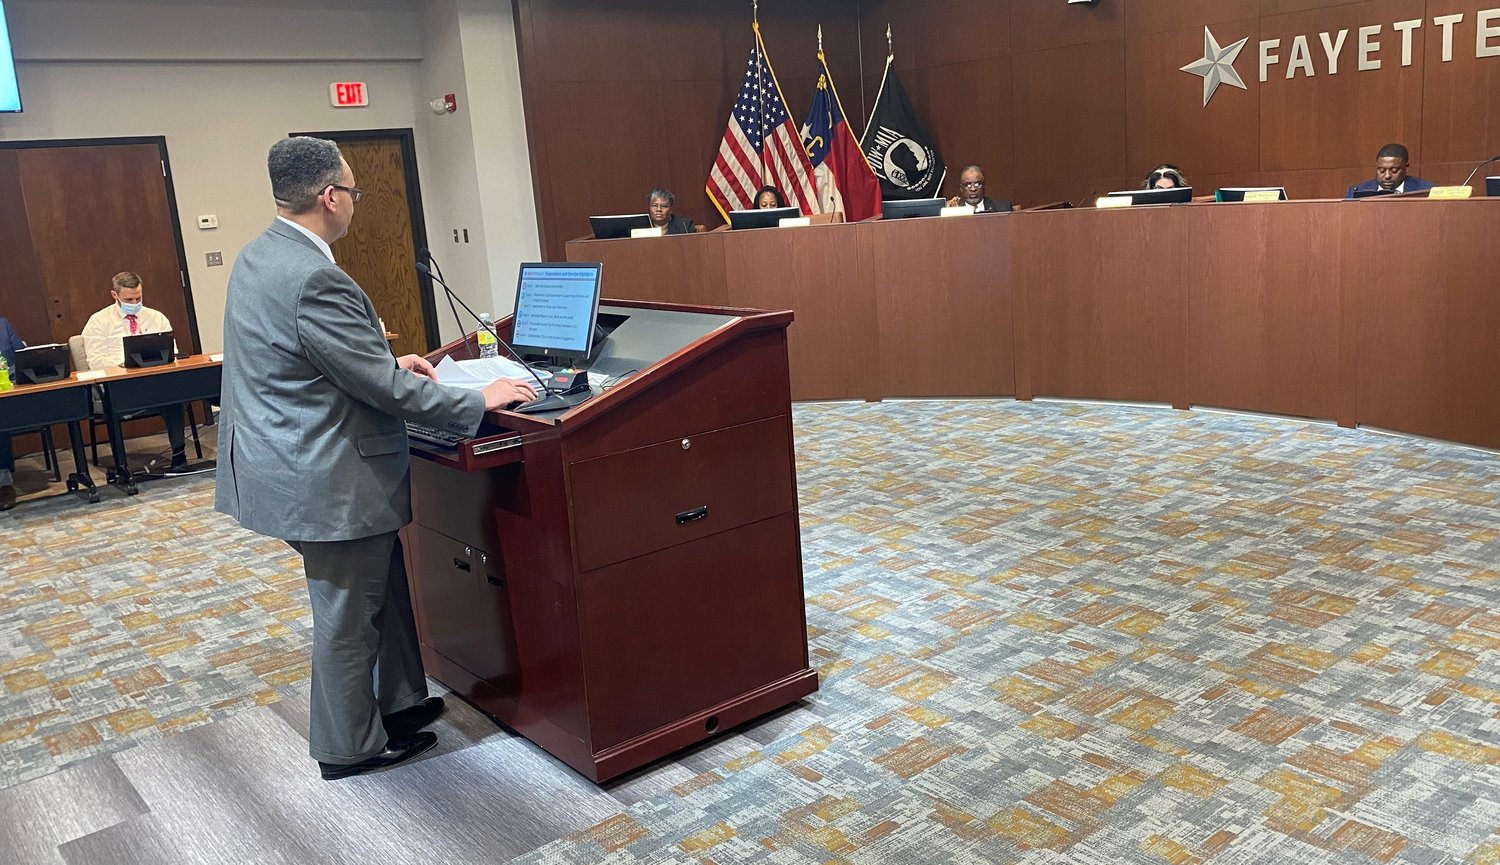 Fayetteville City Manager Doug Hewett presented his recommended 2022-23 budget to the City Council on May 23.